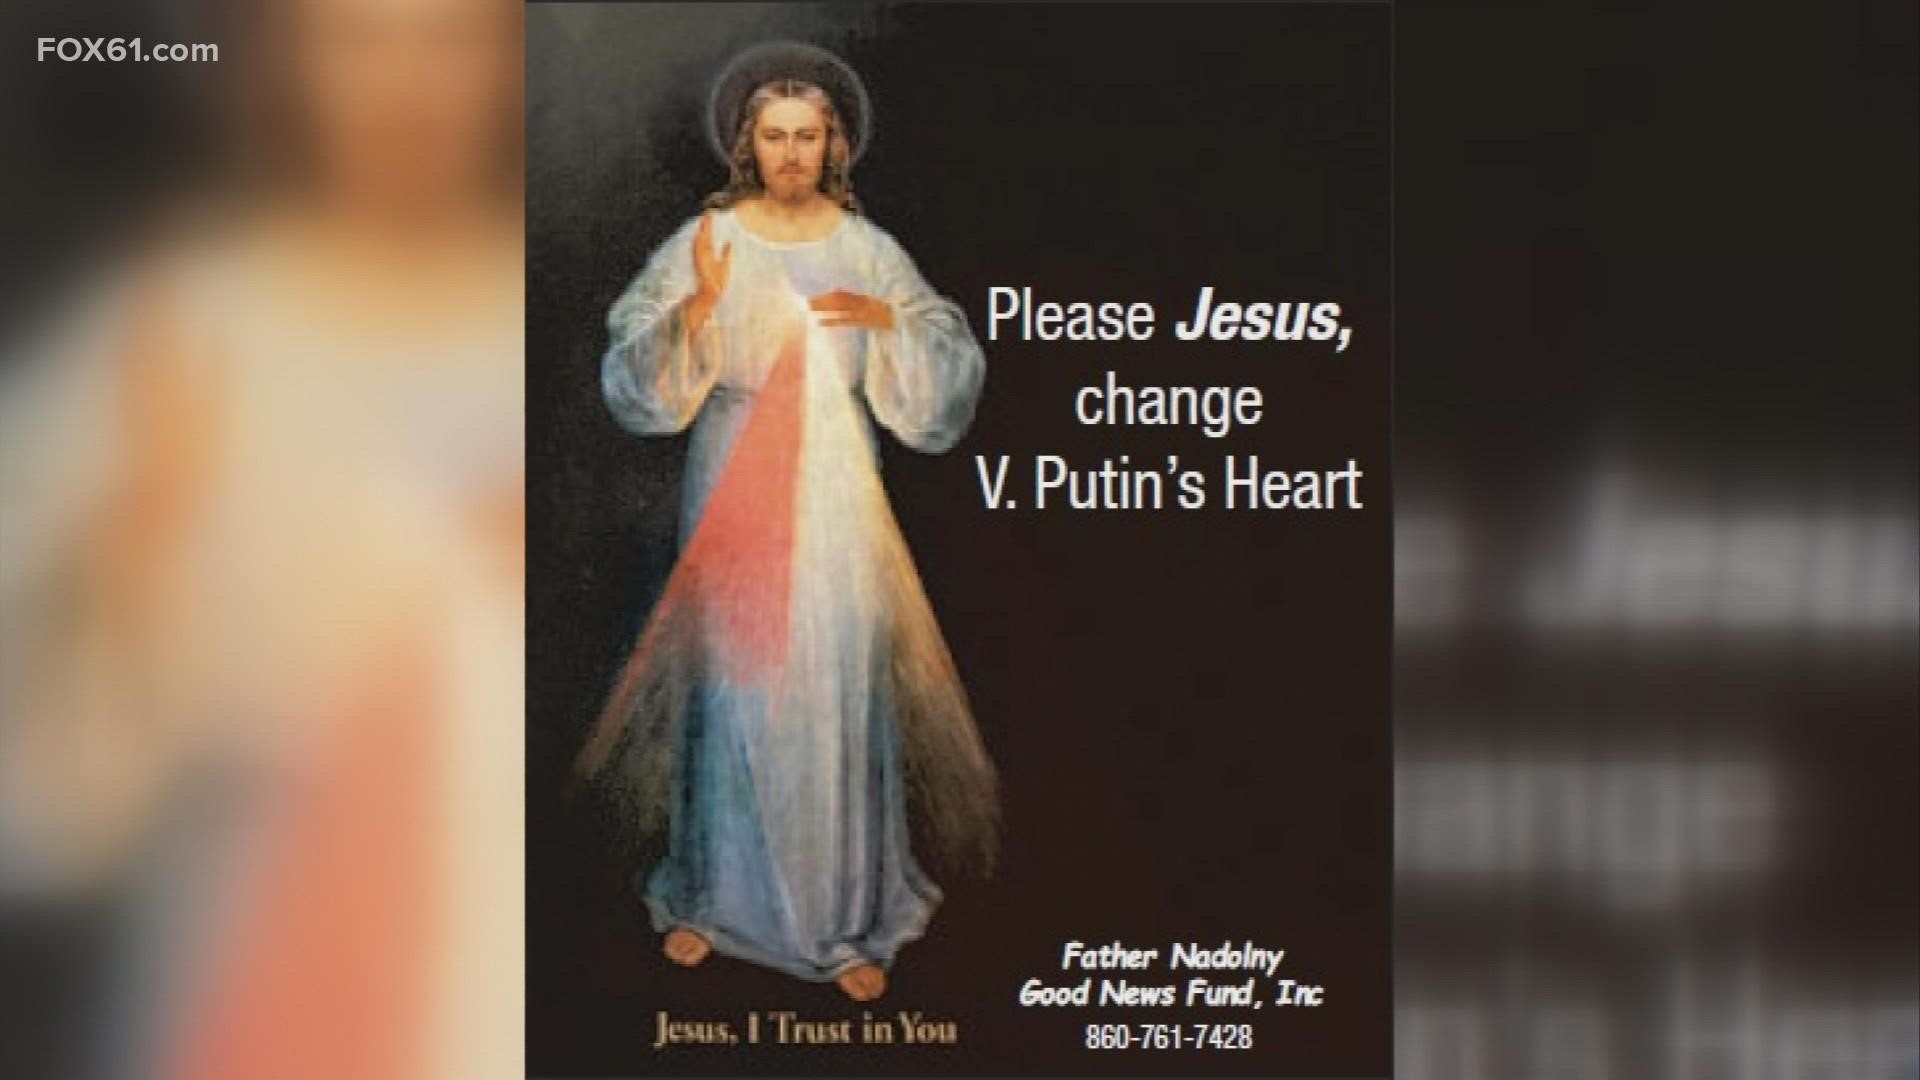 Priest has spent $16,000 on billboards and newspapers to spread this message